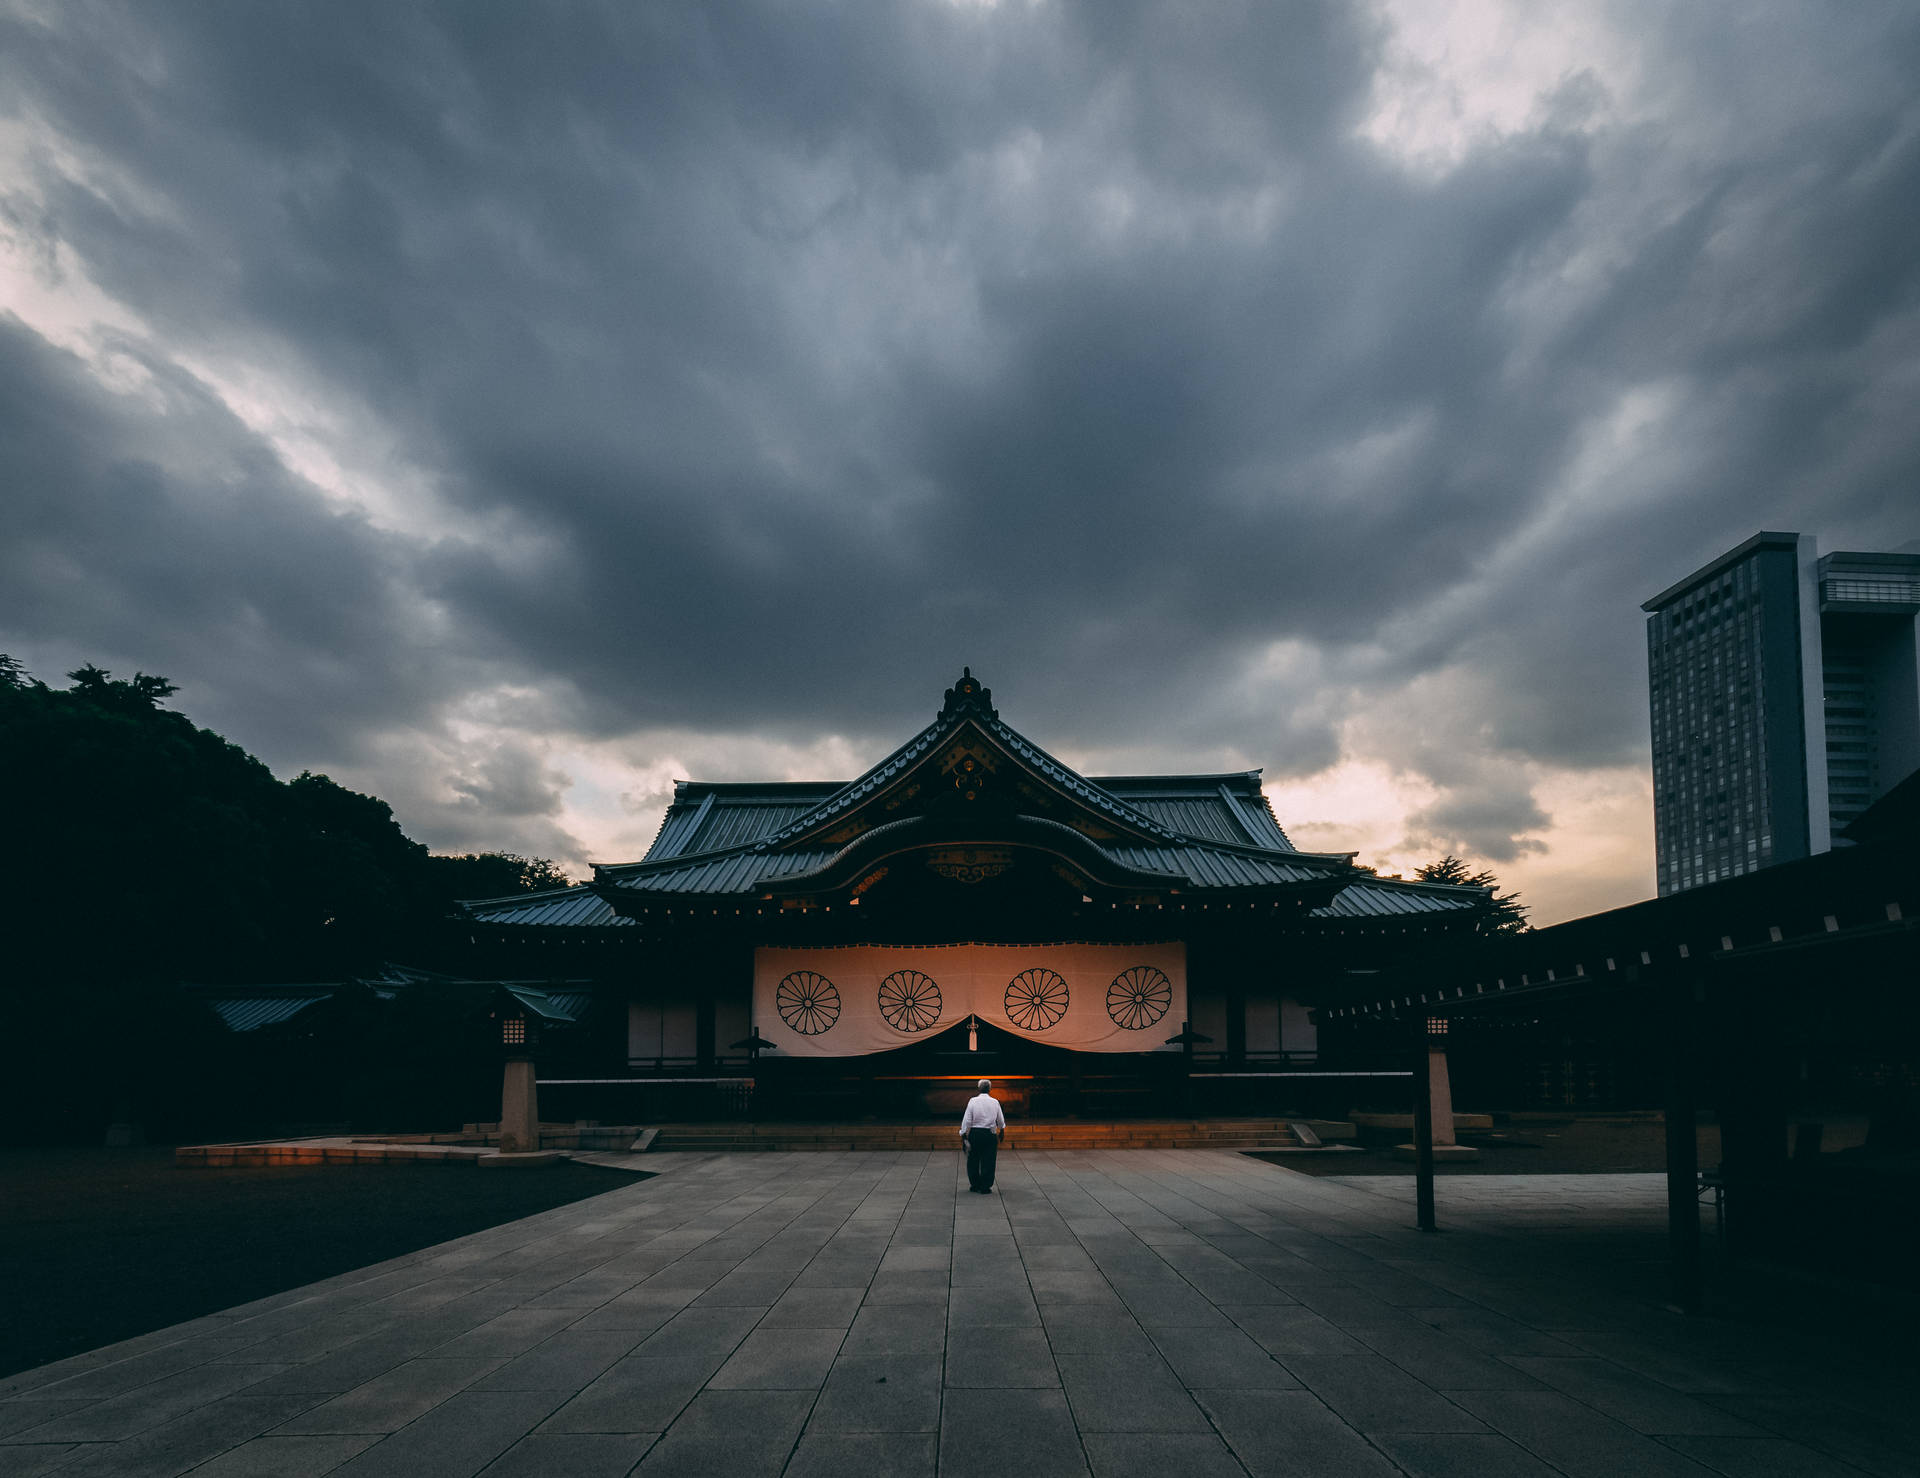 Illuminated By A Mysterious And Enthralling Glow, The Ancient City Of Japan Is Captivating. Background